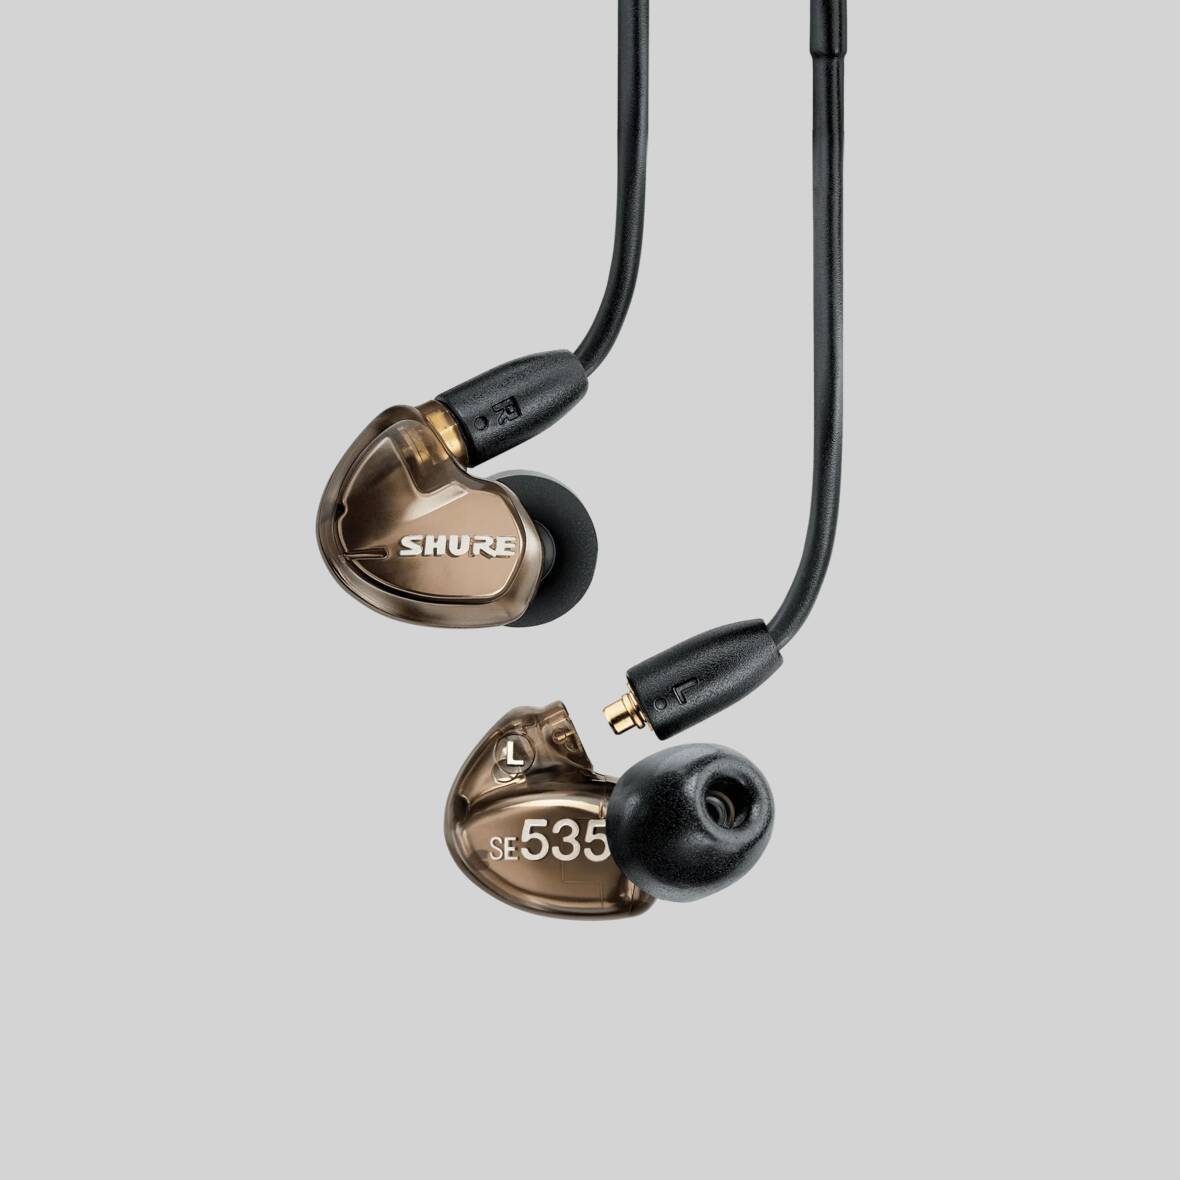 SHURE イヤホン SE535-CL-A クリアー 美品 国内正規品 - agame.ag